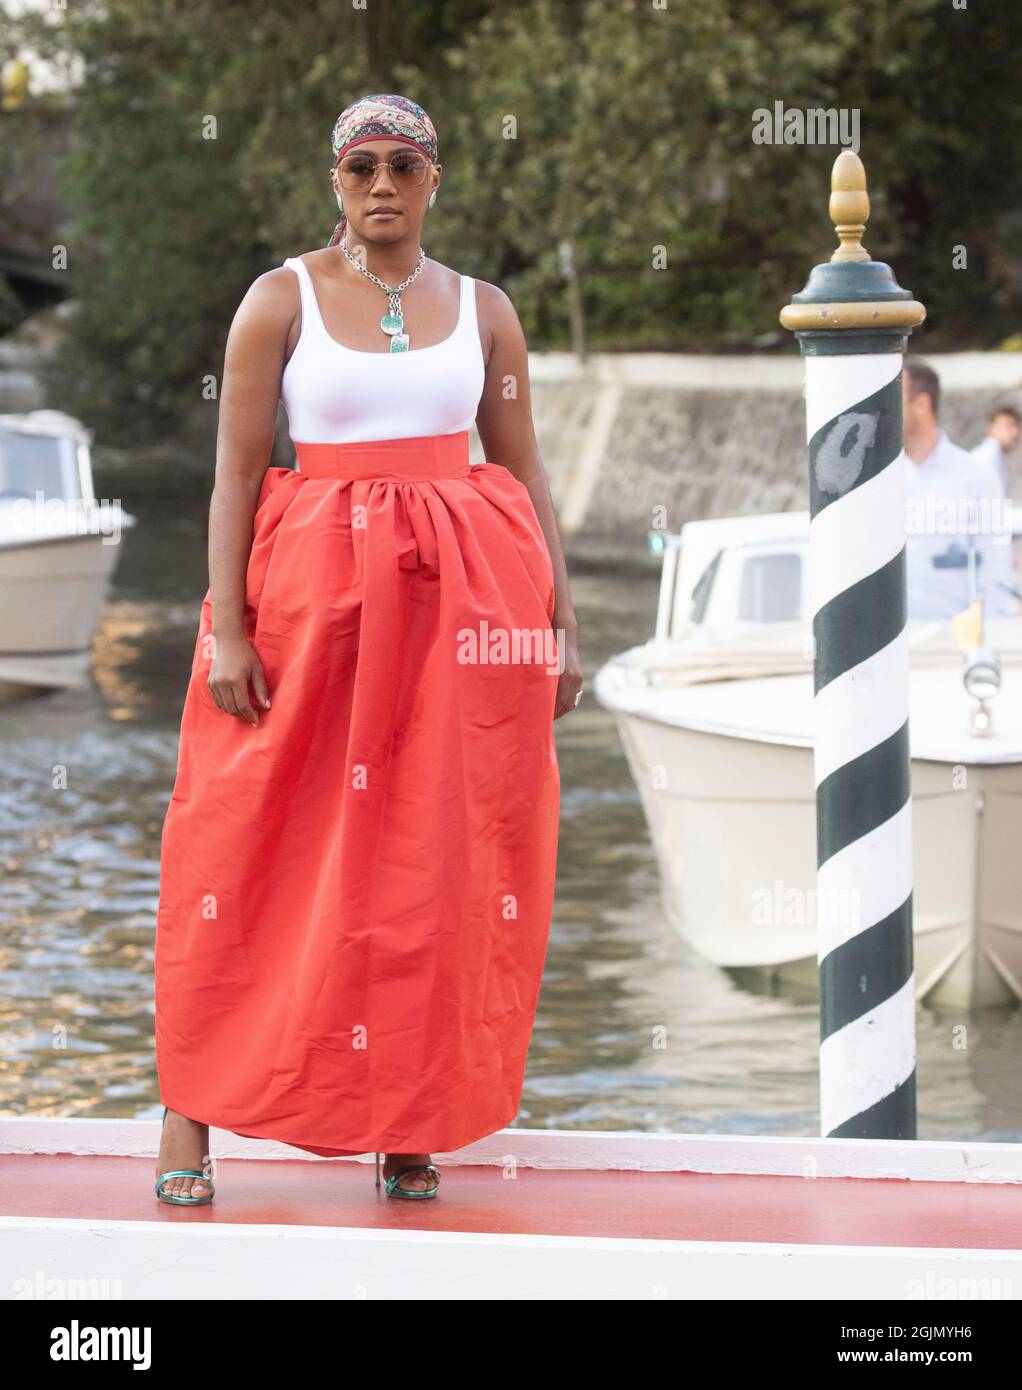 Tiffany Haddish, actress, stand-up comedian and author, arrives at the Venice Film Festival. Stock Photo